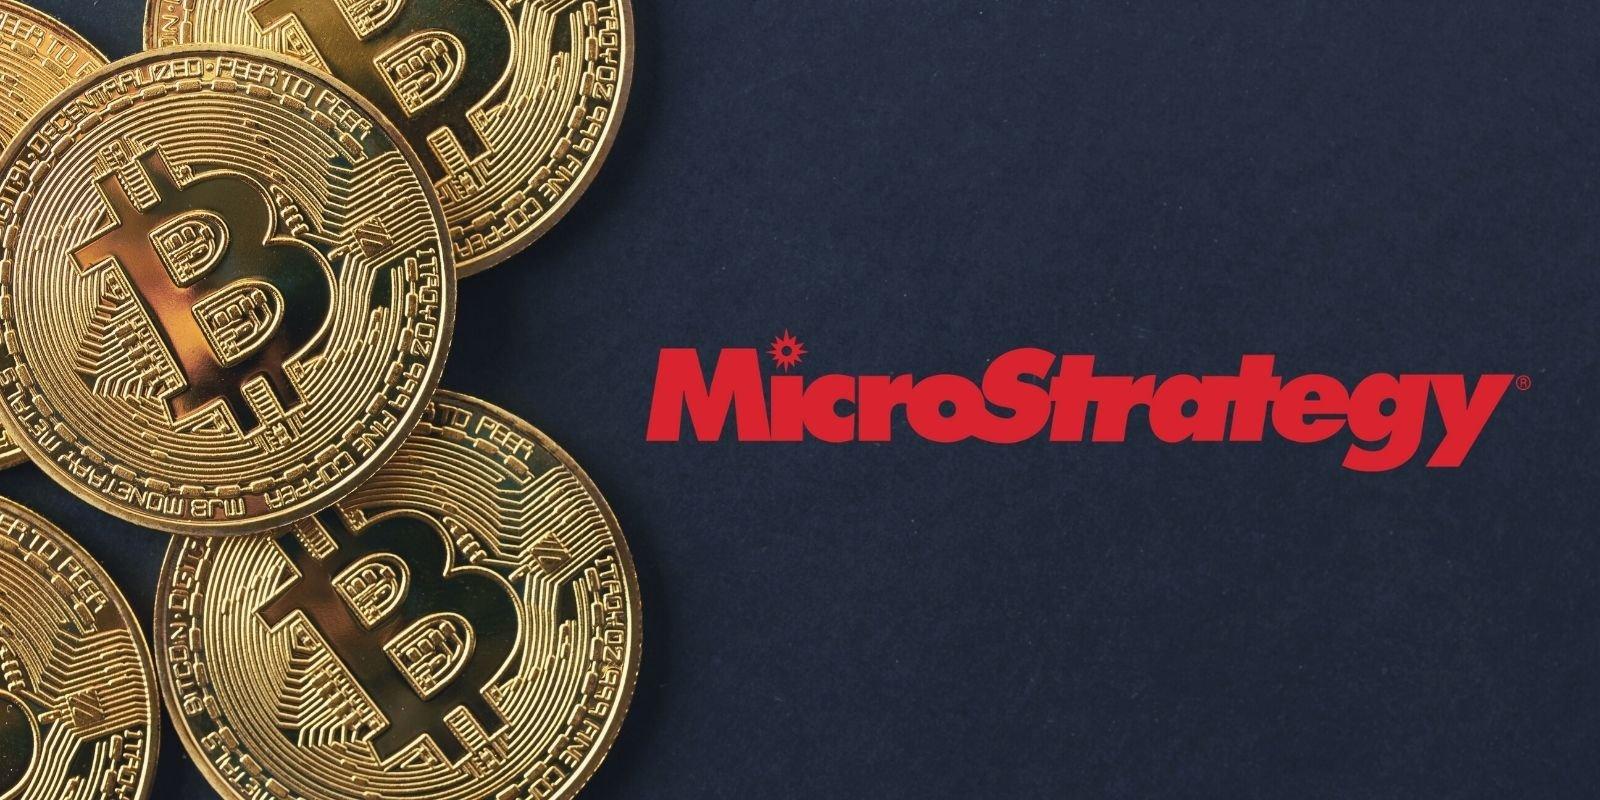 MicroStrategy to launch Bitcoin & Lightning for Corporations at its annual conference